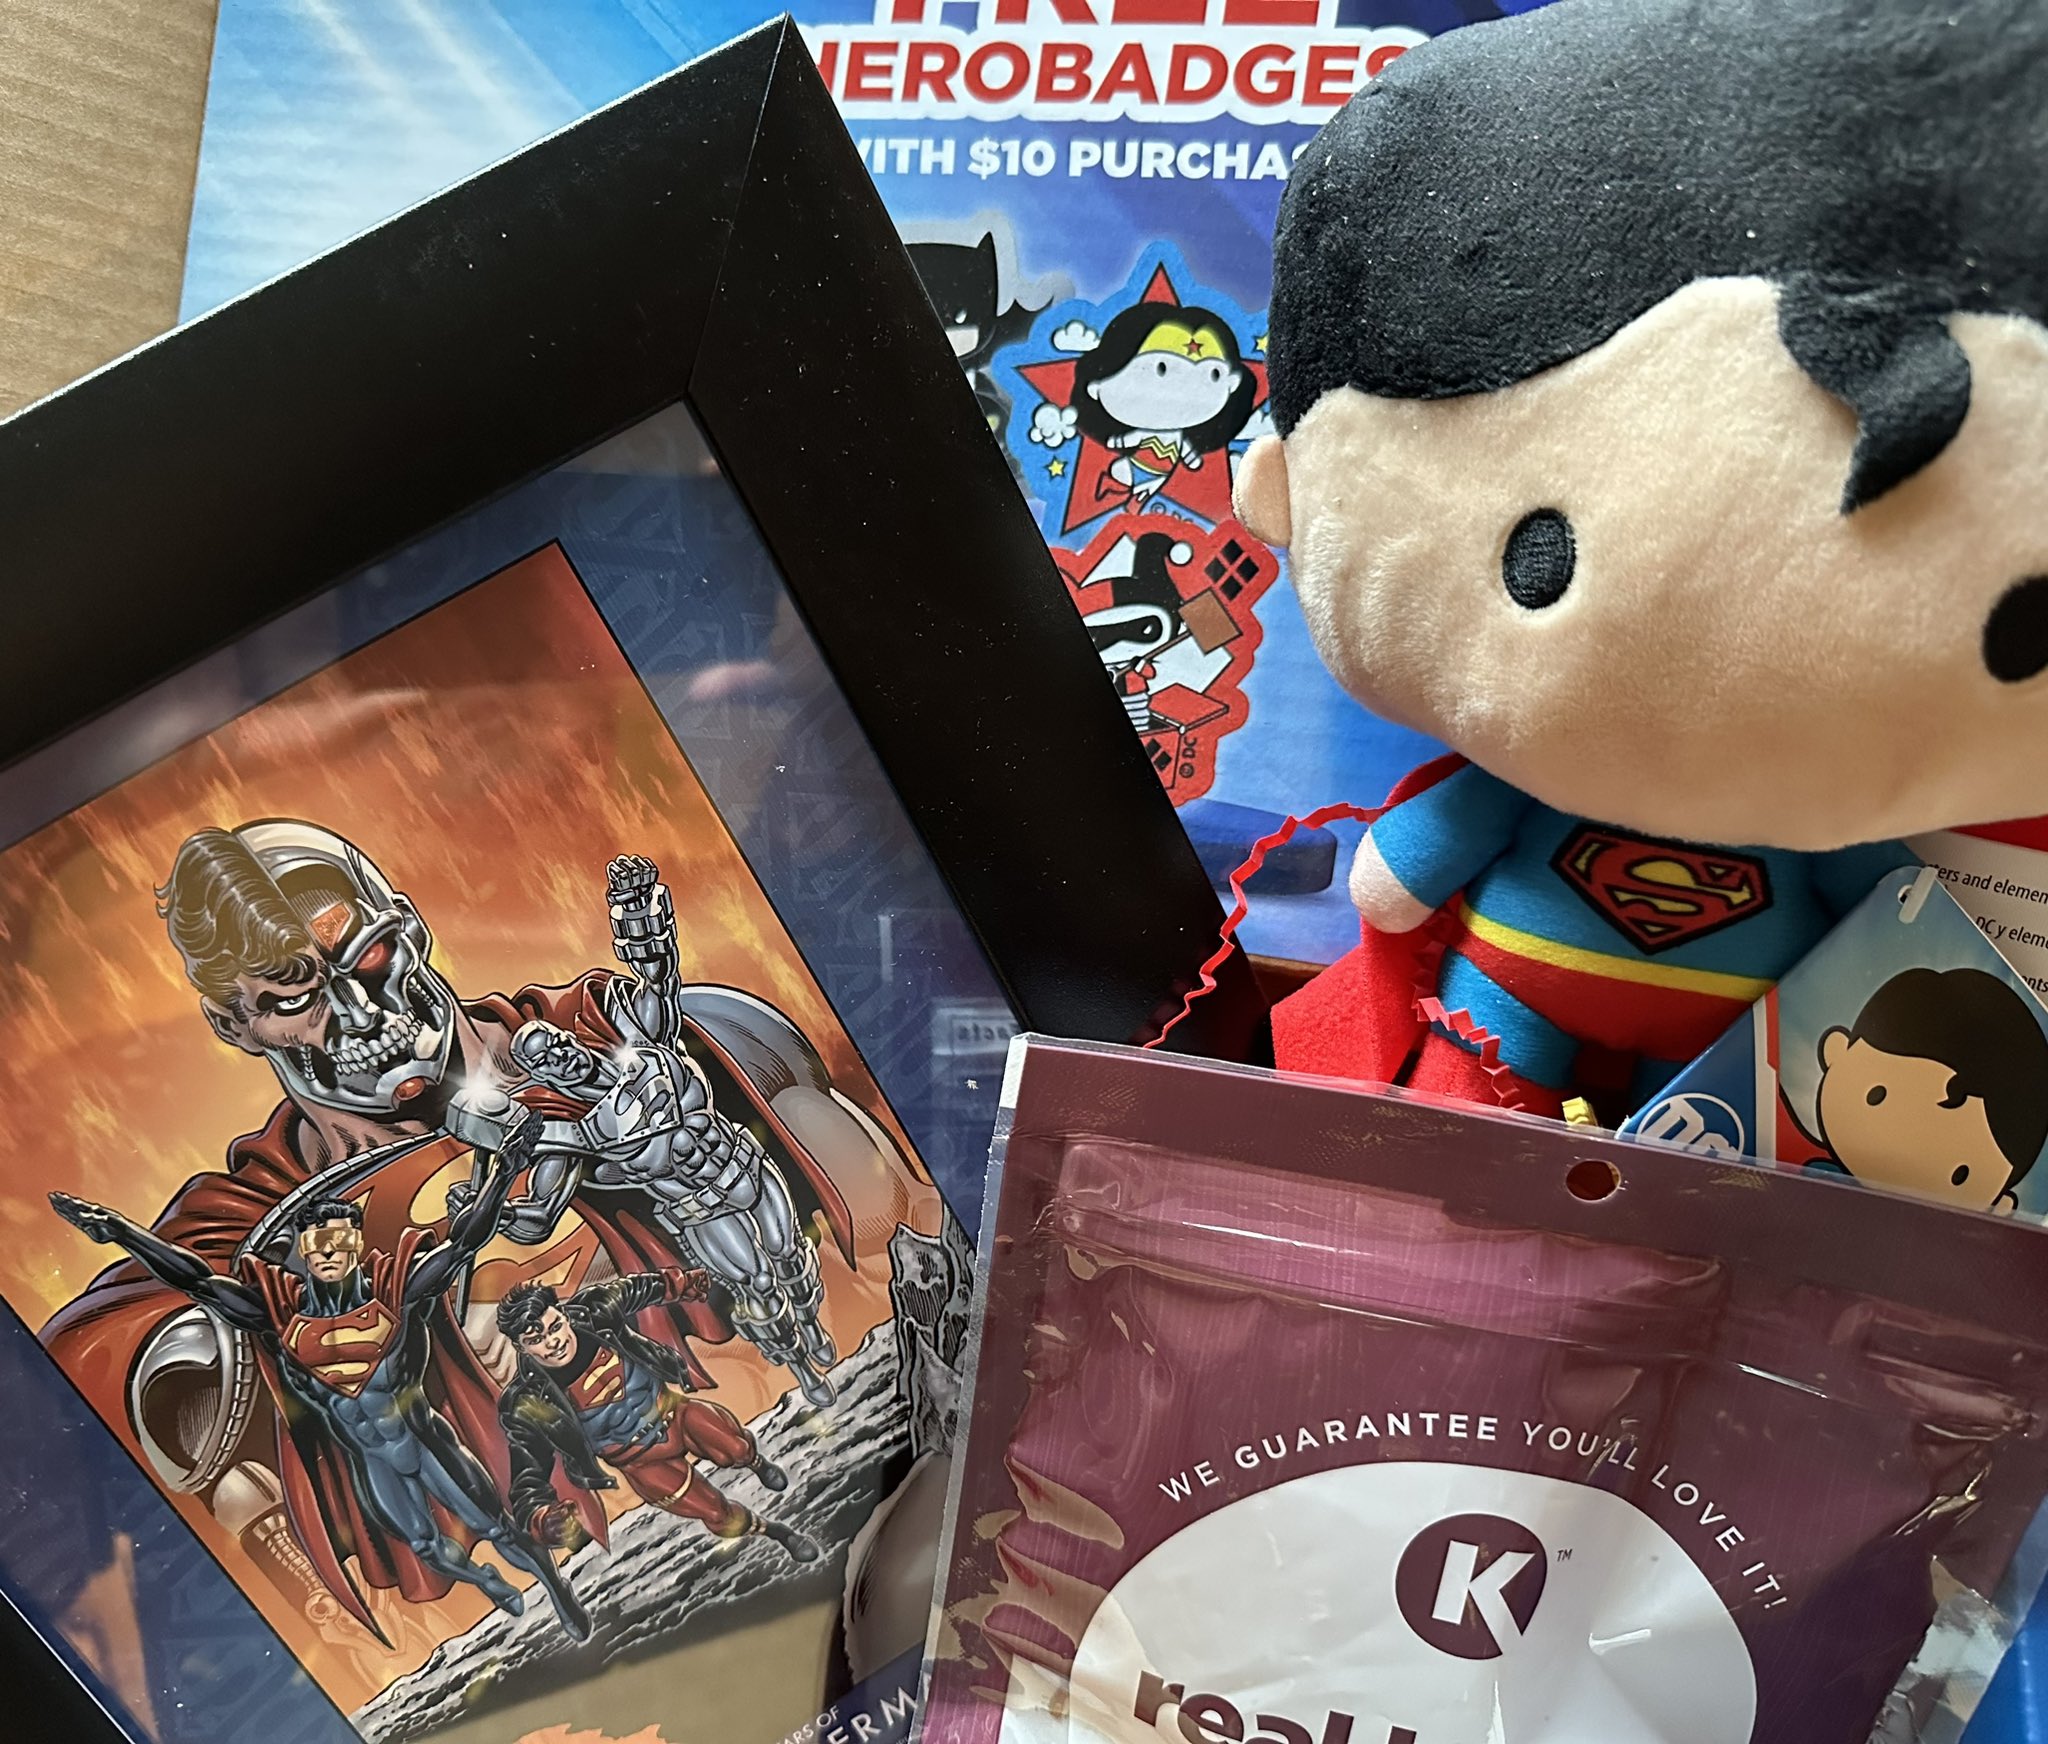 Circle K teams up with DC Comics to bring fans 24 HeroBadges, collectibles and more